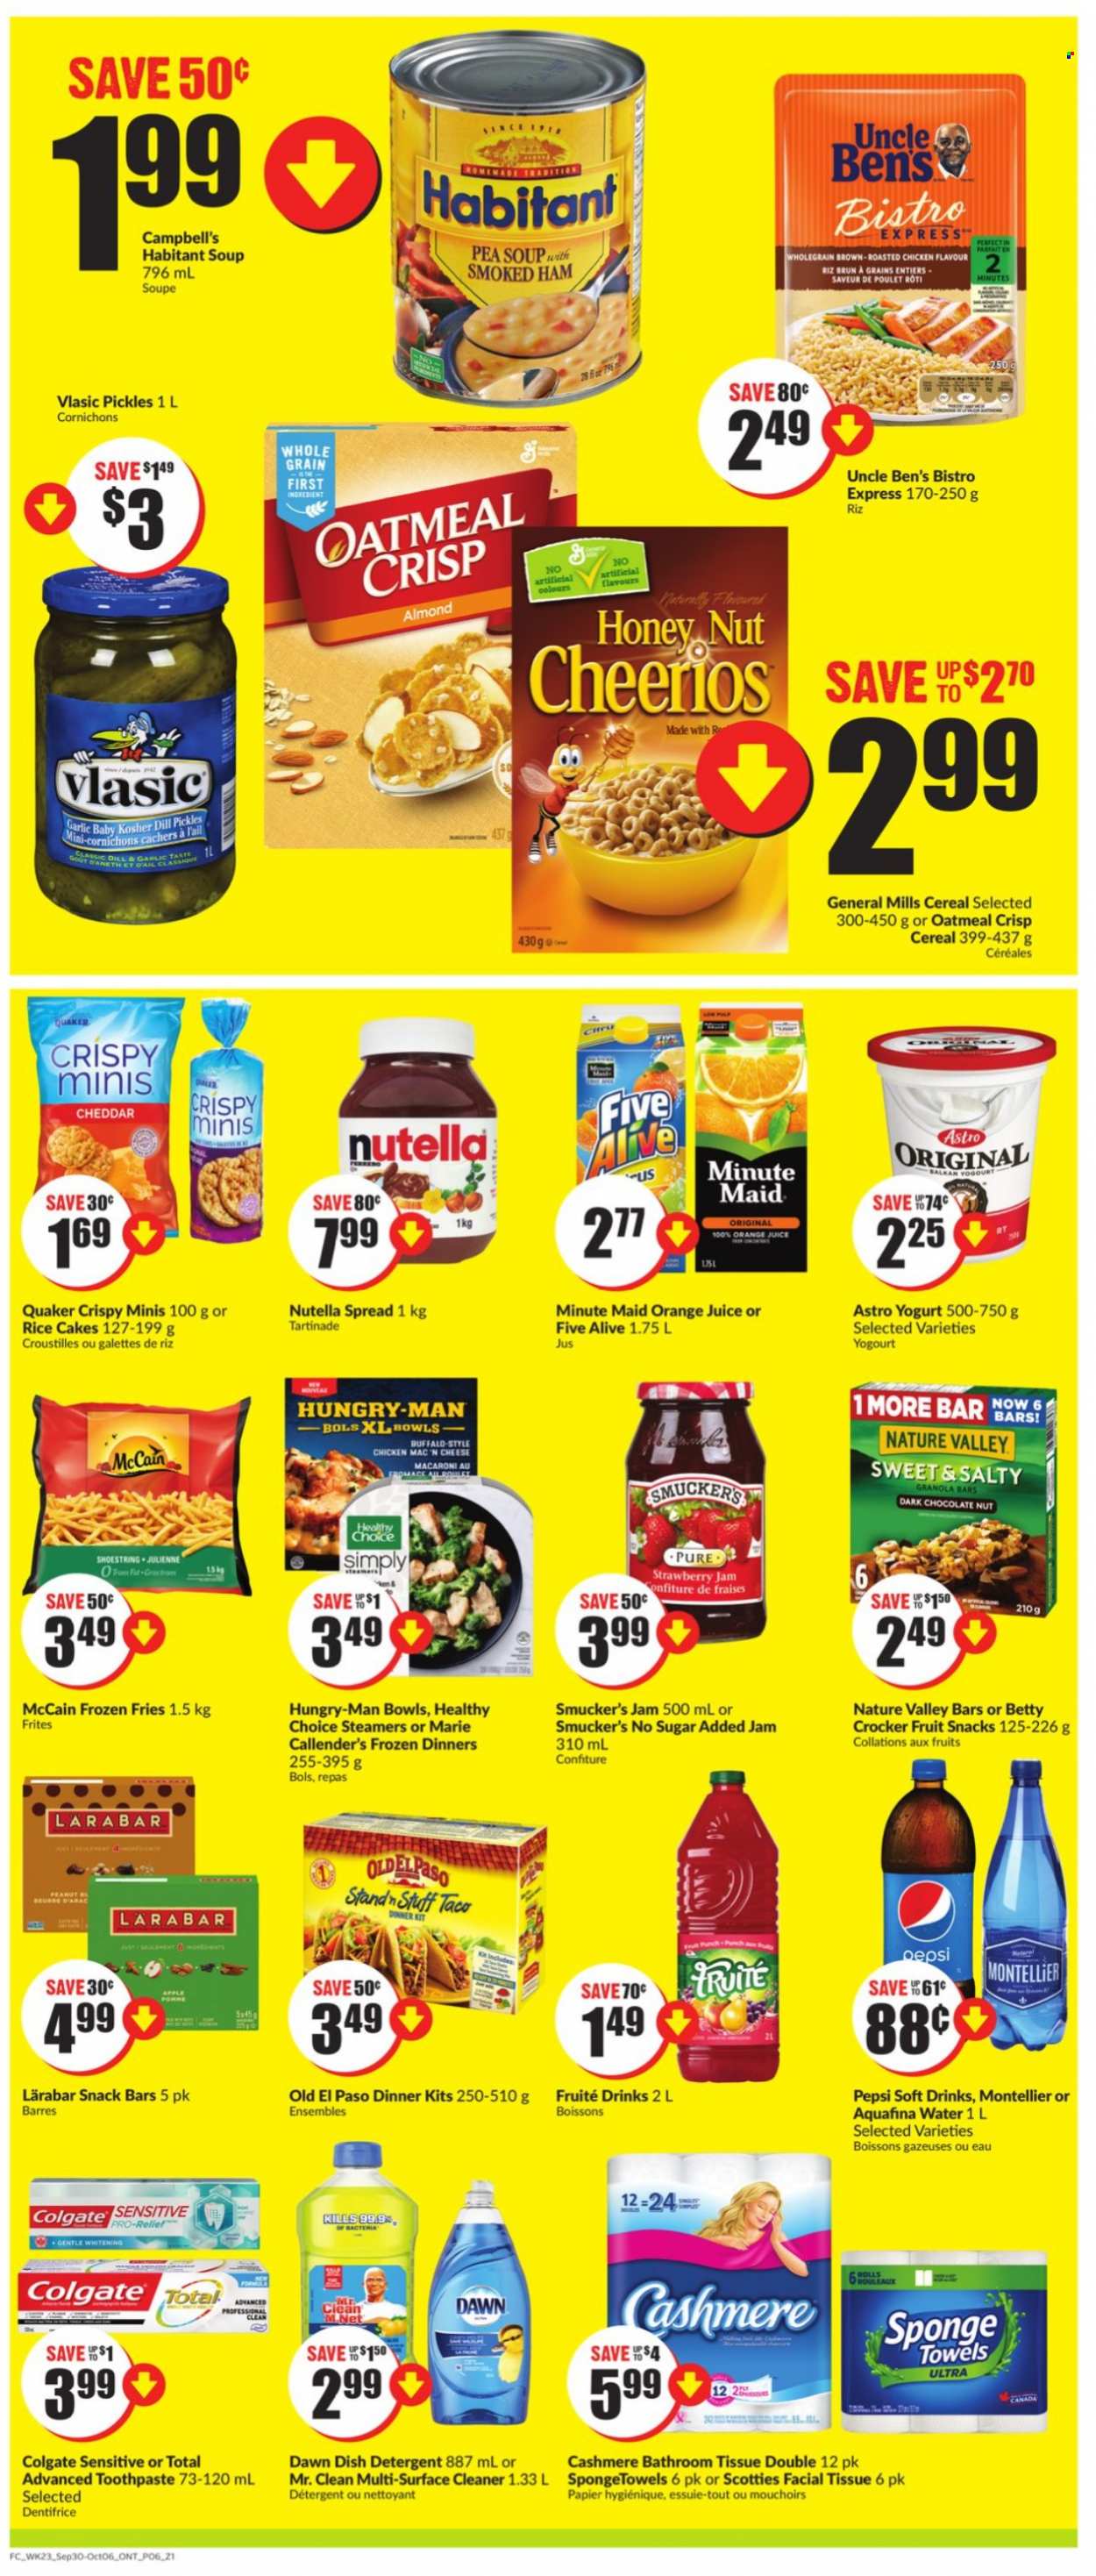 thumbnail - Chalo! FreshCo. Flyer - September 30, 2021 - October 06, 2021 - Sales products - Old El Paso, garlic, Campbell's, chicken roast, macaroni, soup, dinner kit, Quaker, Healthy Choice, Marie Callender's, ham, smoked ham, cheese, yoghurt, McCain, potato fries, chocolate, dark chocolate, fruit snack, snack bar, oatmeal, strawberry jam, pickles, Uncle Ben's, cereals, Cheerios, granola bar, Nature Valley, dill, fruit jam, Pepsi, orange juice, juice, soft drink, fruit punch, Aquafina, detergent, Colgate, Nutella. Page 4.